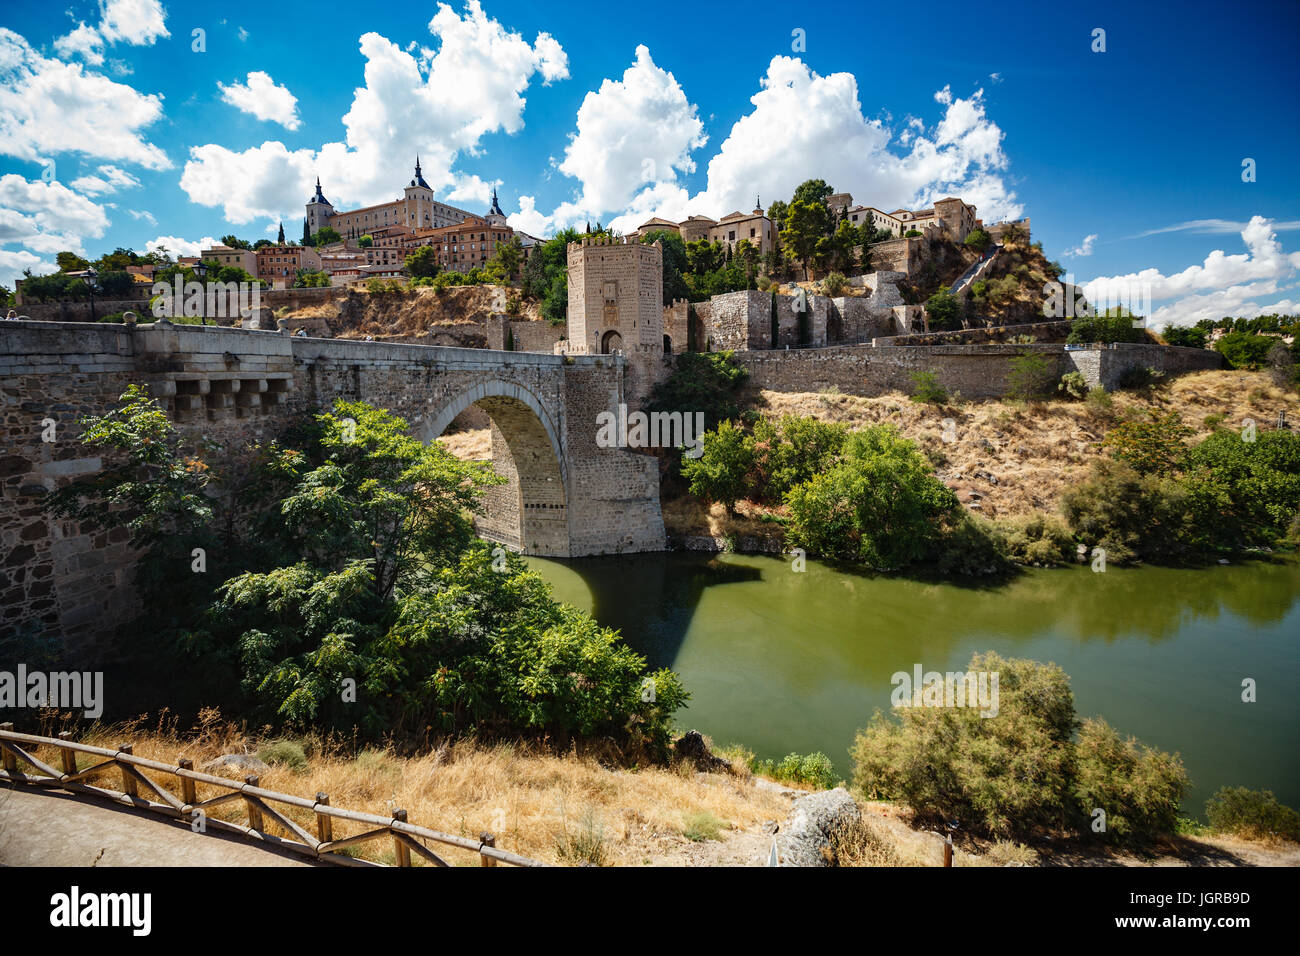 Panoramic view of Toledo Spain on a sunny summer day. Ancient stone walls and houses, blue sky and red-hot earth. Stock Photo